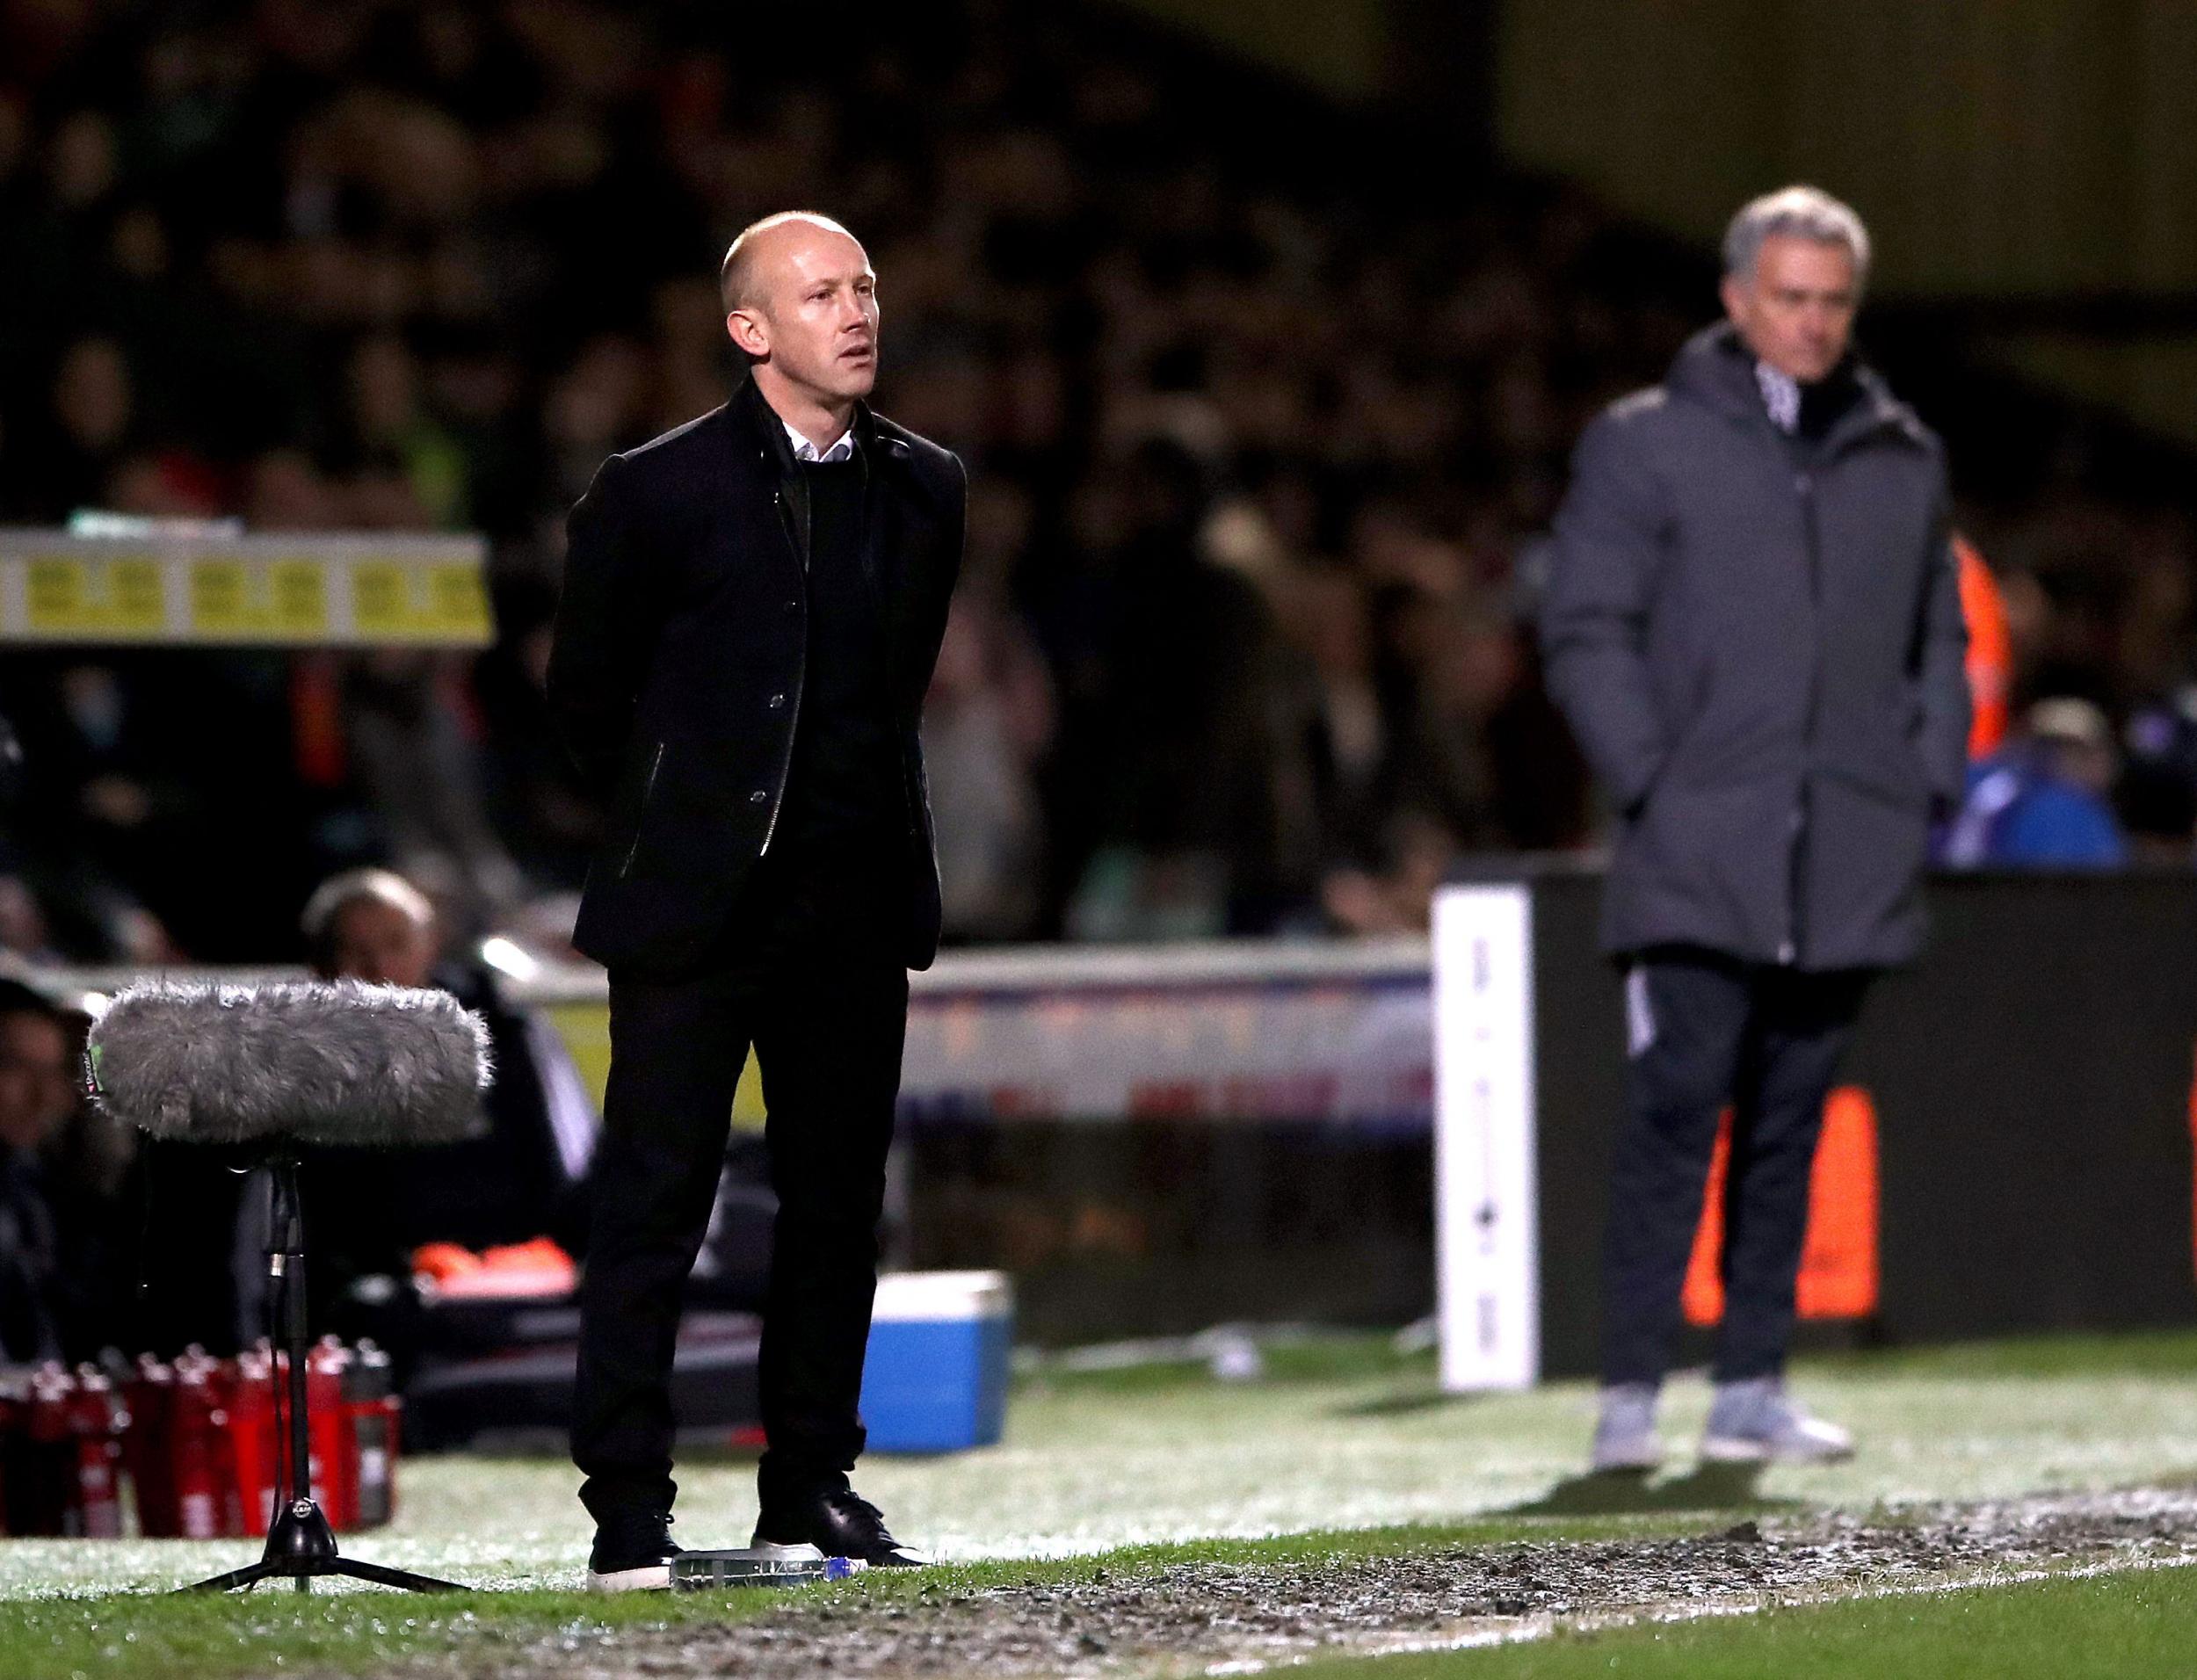 Jose Mourinho 'oozes class' claims Yeovil Town boss Darren Way after Manchester United's FA Cup win